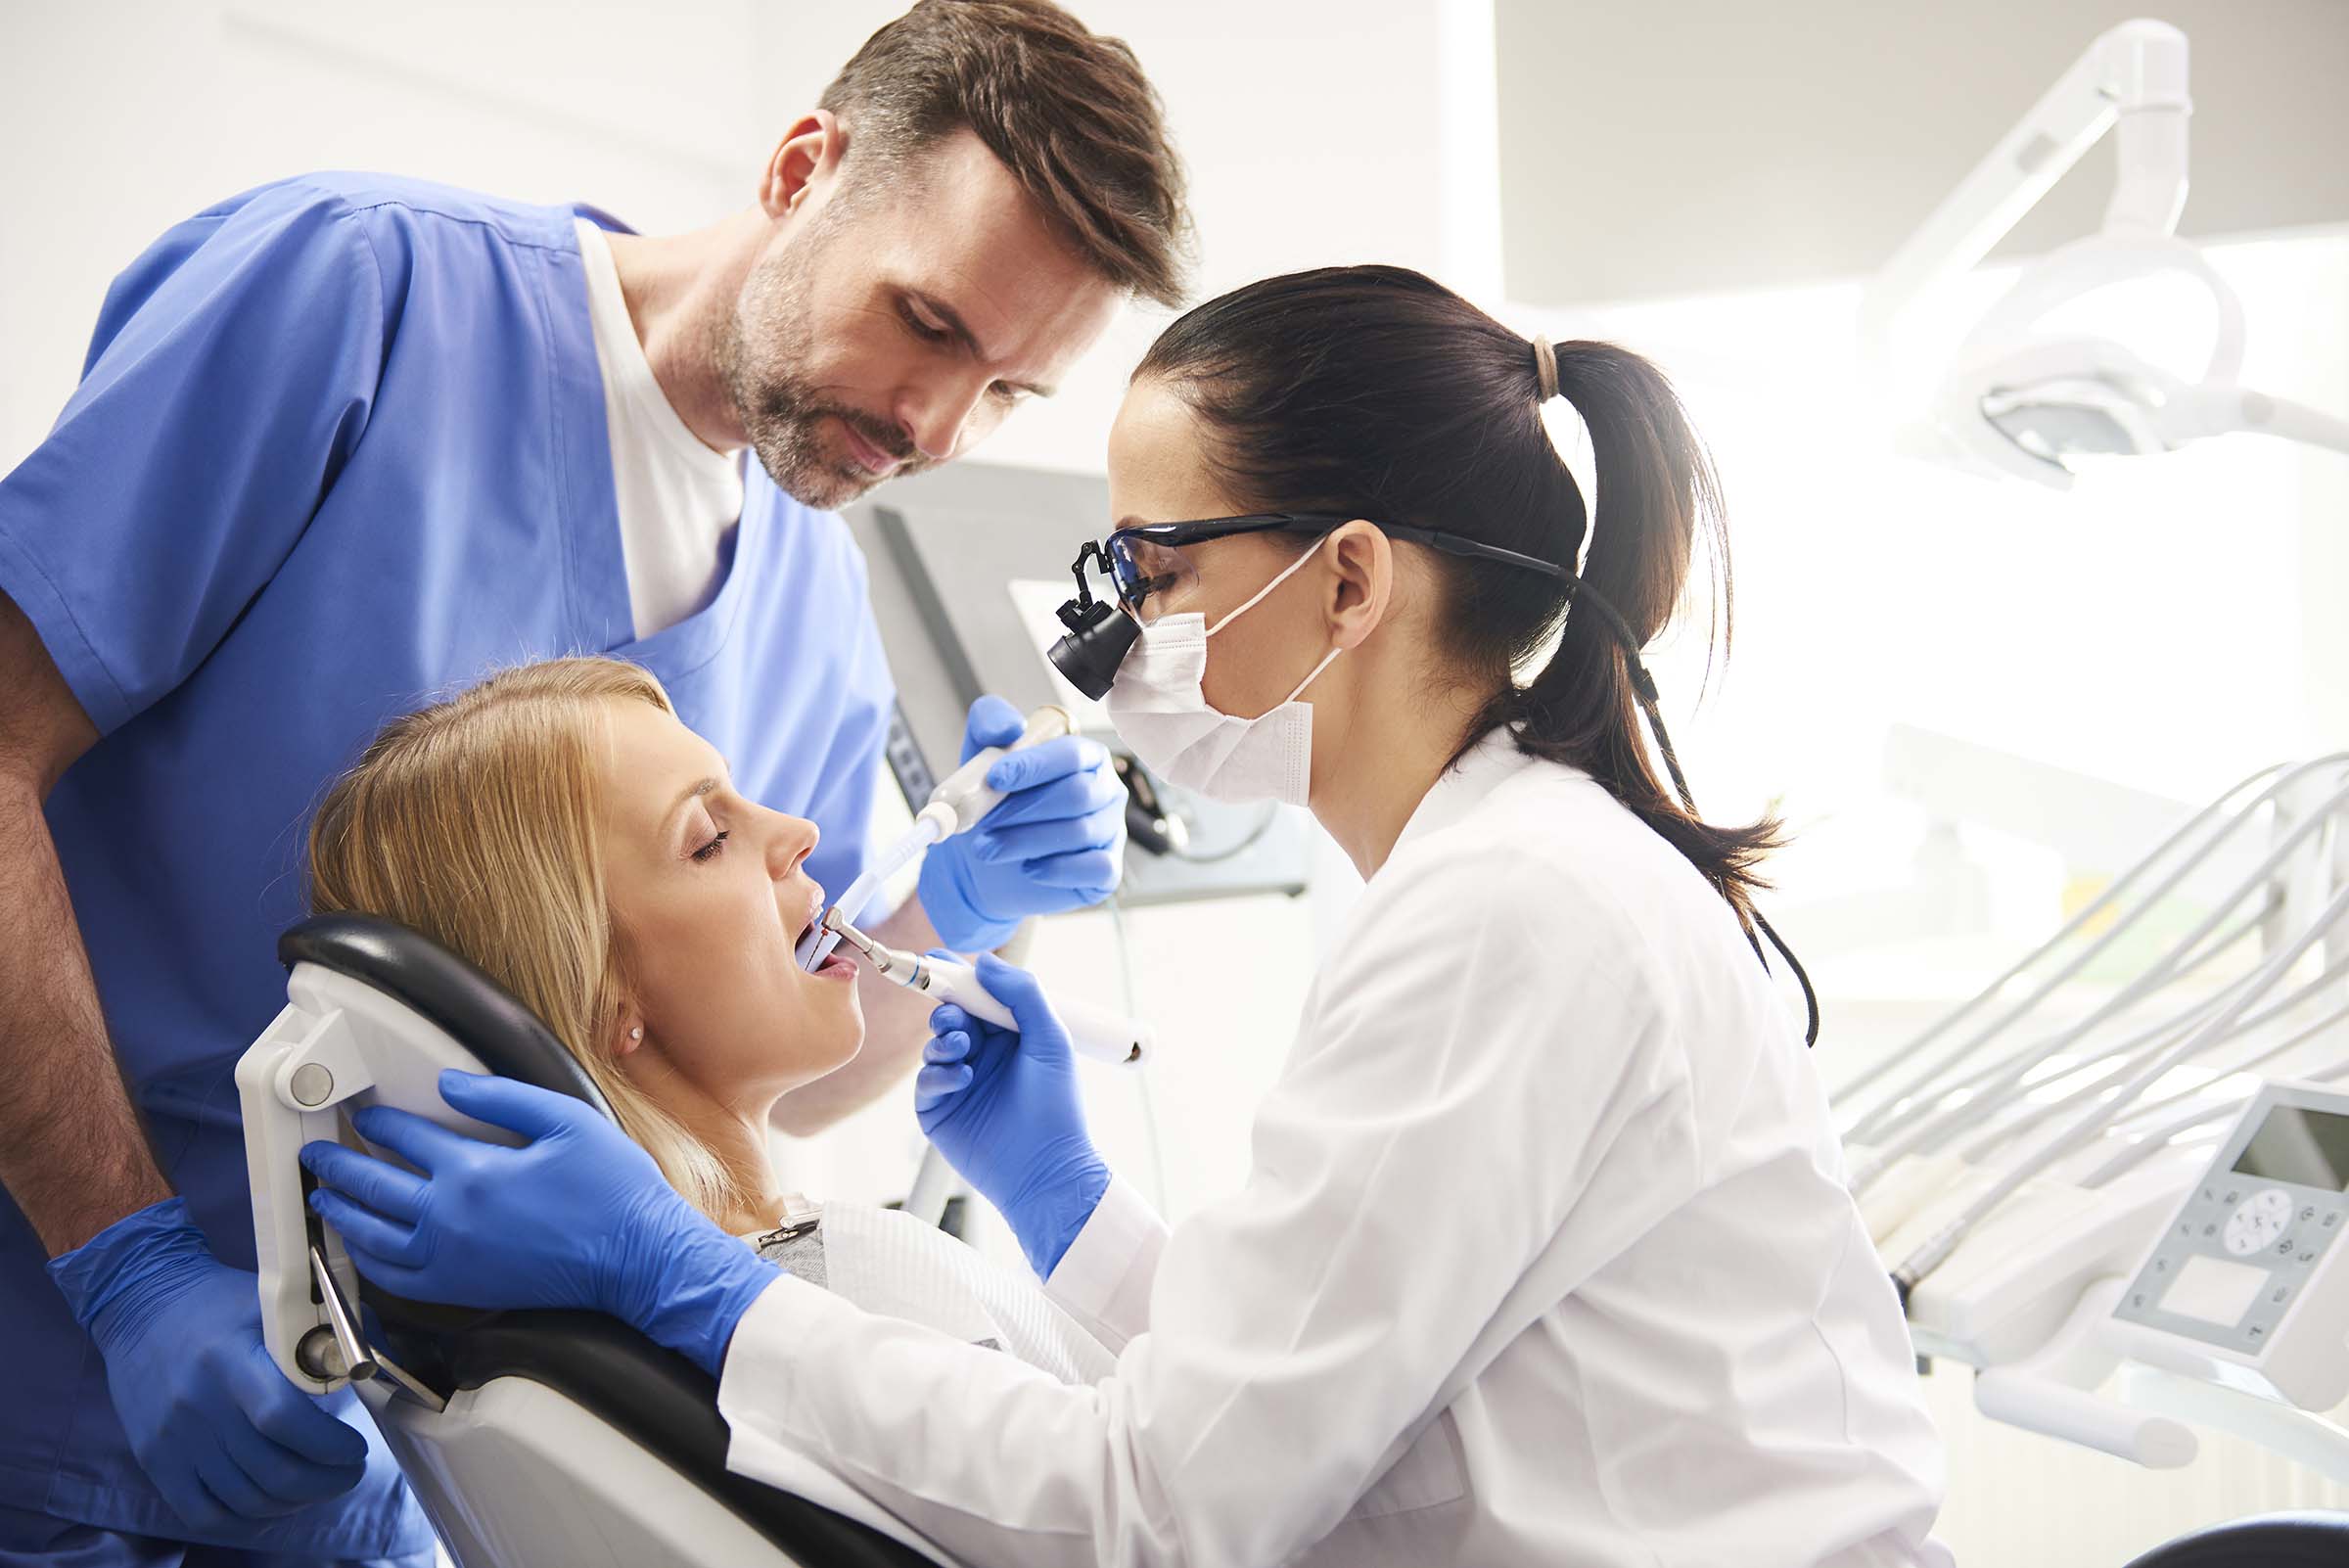 dentist-and-her-assistant-doing-their-work-in-dent-7A6SXUJ.jpg